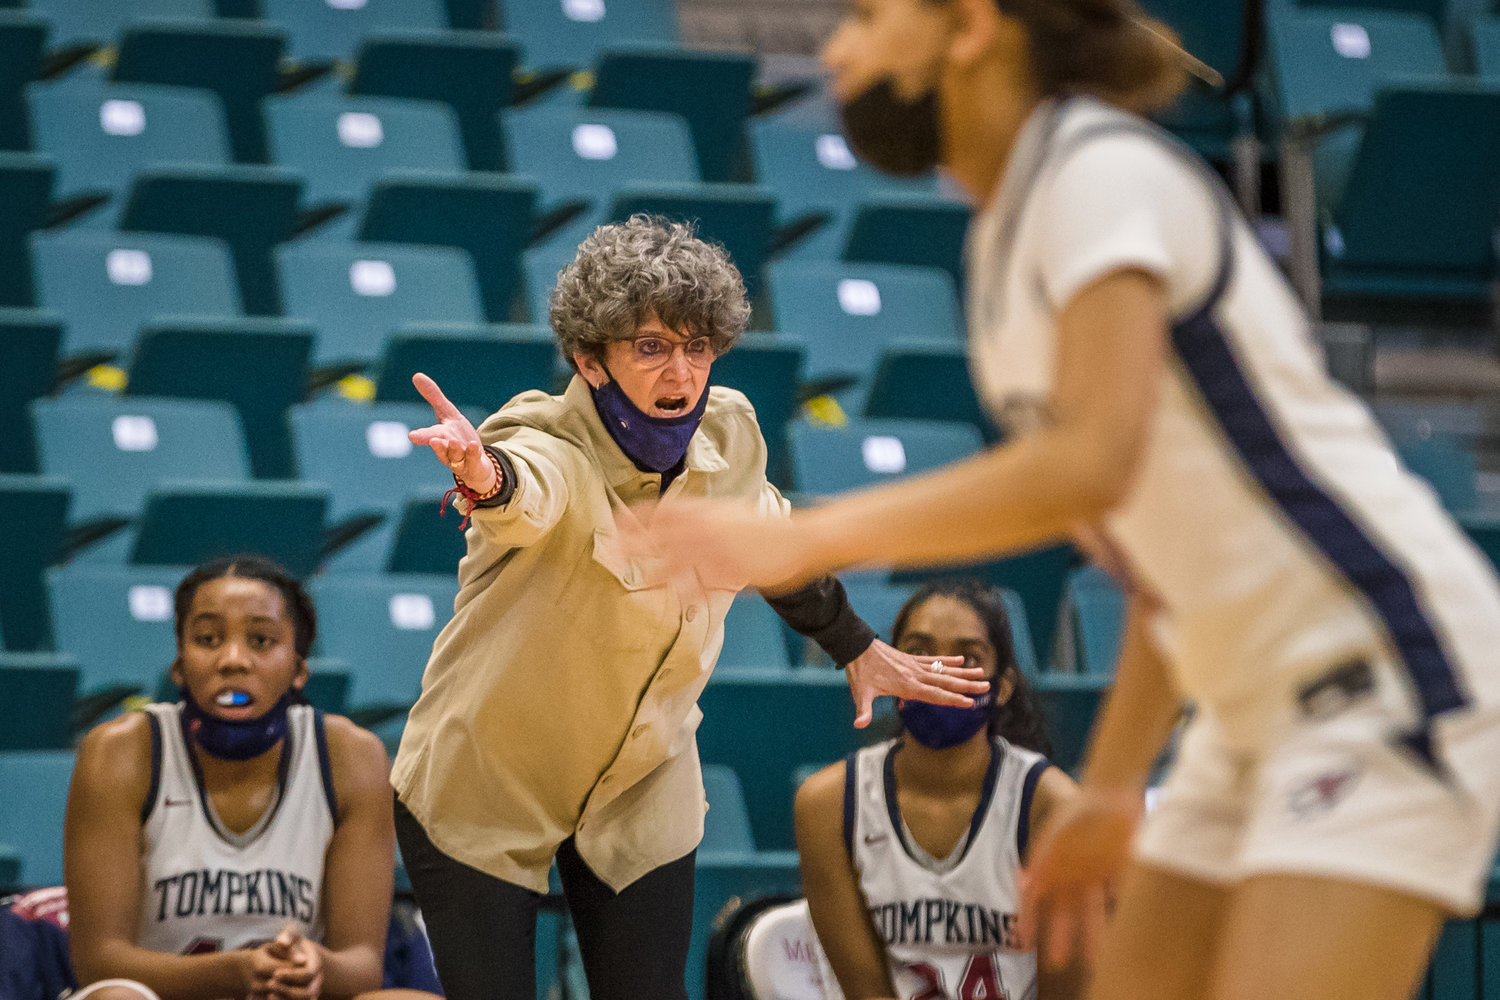 Tompkins’ Tamatha Ray was the District 19-6A girls basketball Coach of the Year this season.